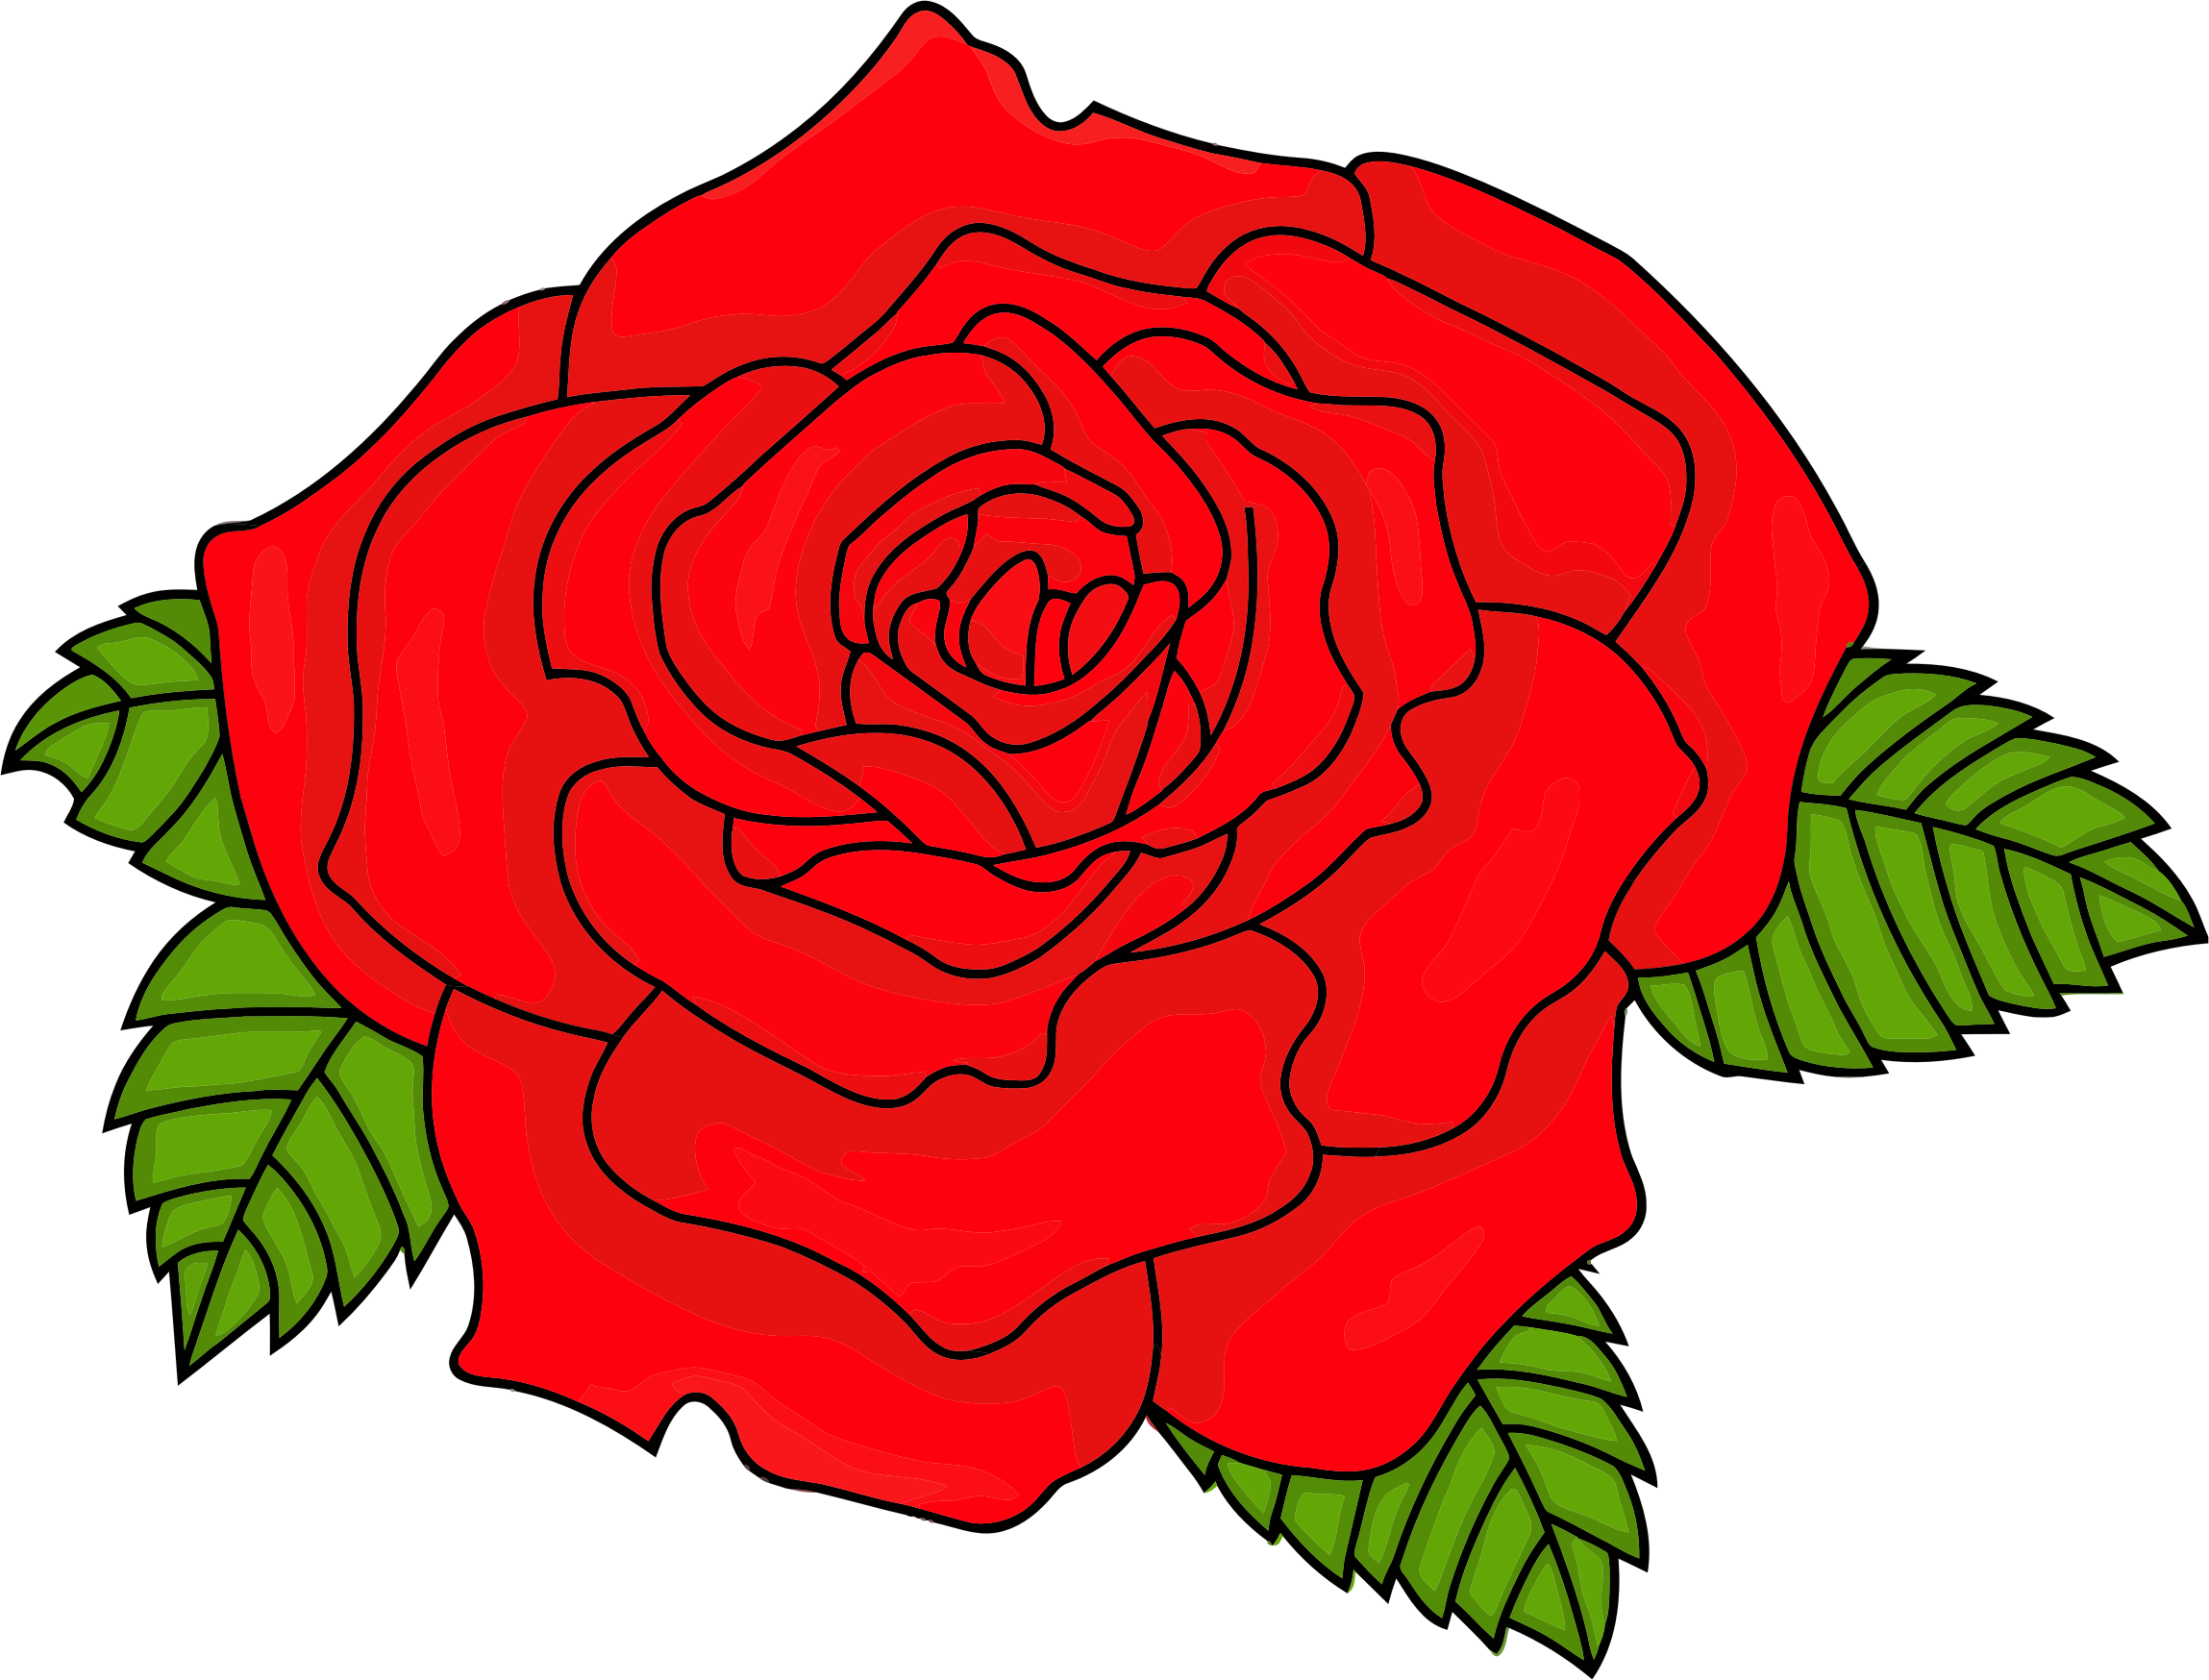 Shaded Red Rose - Portable Network Graphics (2298x1748)